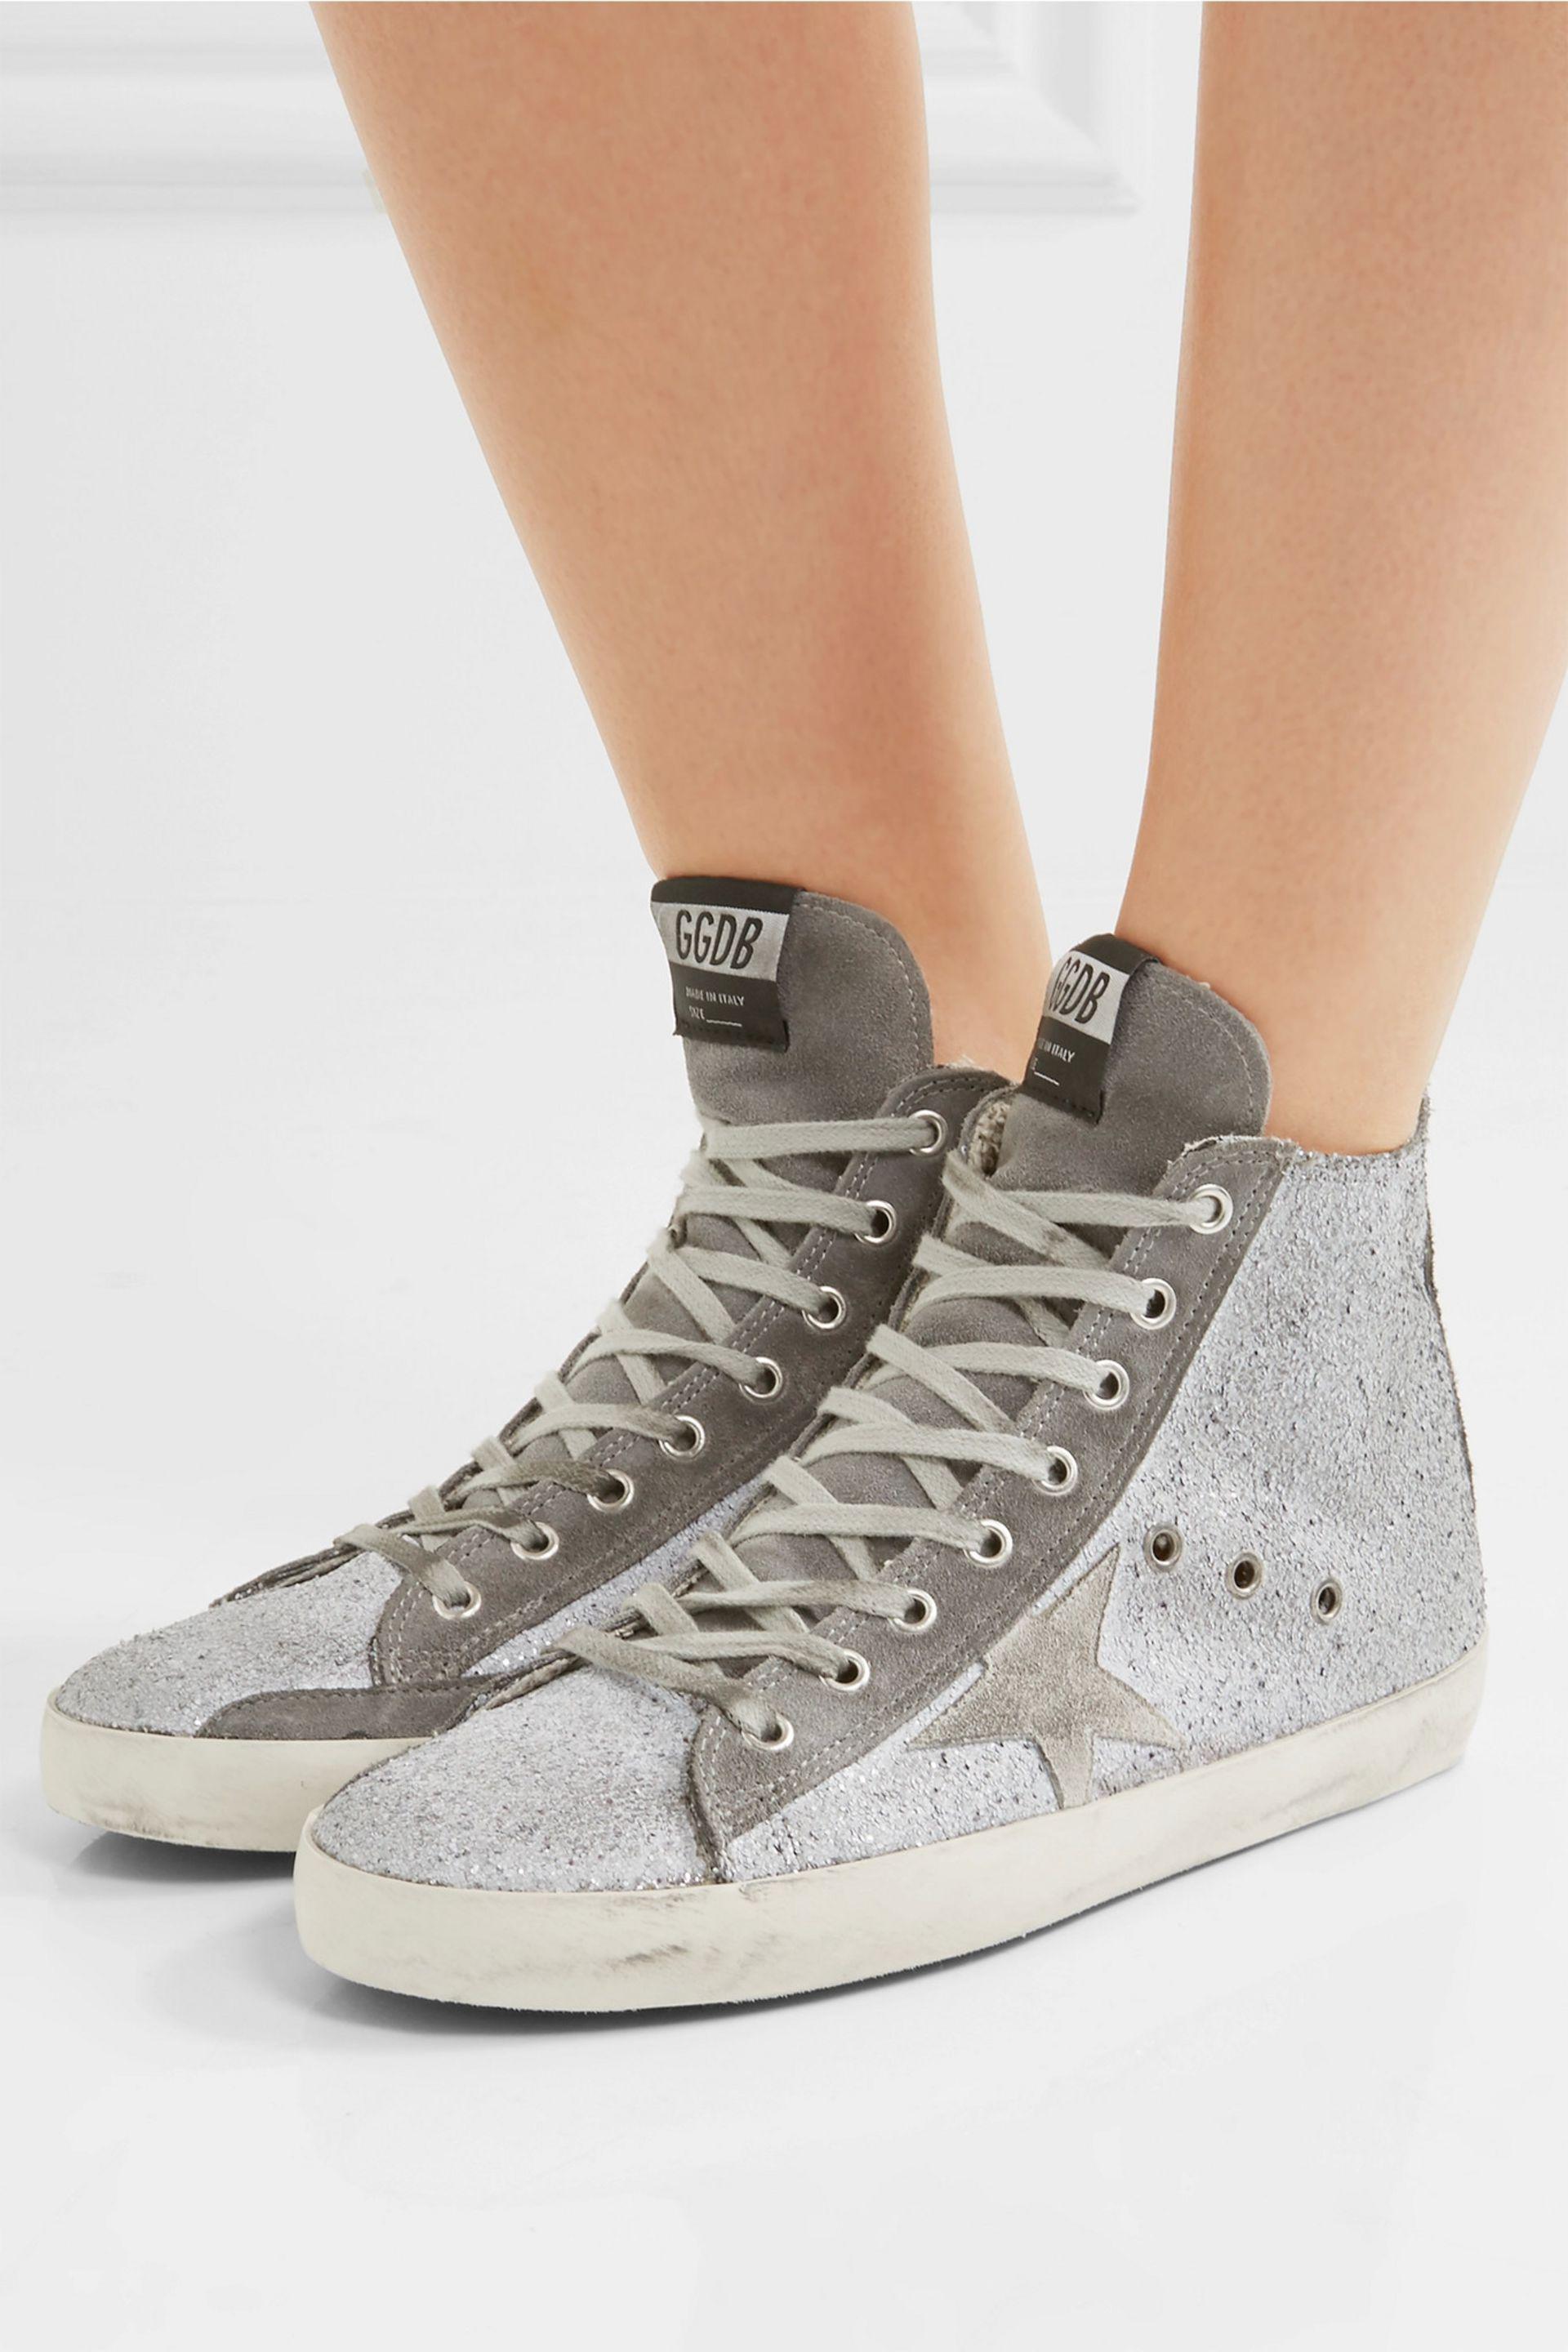 Lyst - Golden Goose Deluxe Brand Francy Distressed Glittered Suede High ...